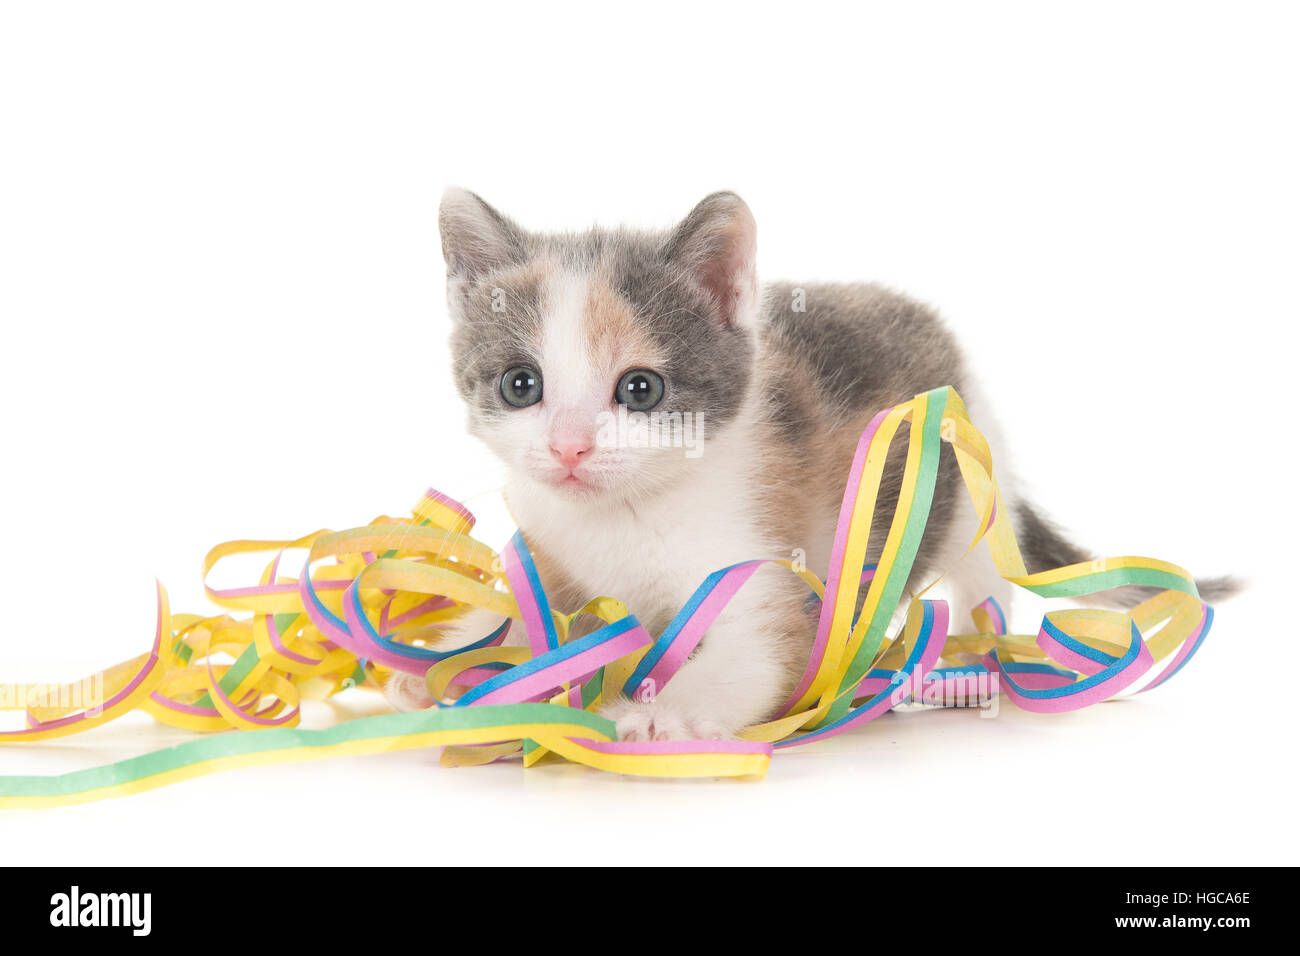 Cute grey and white baby cat kitten playing with celebration party garlands on a white background Stock Photo